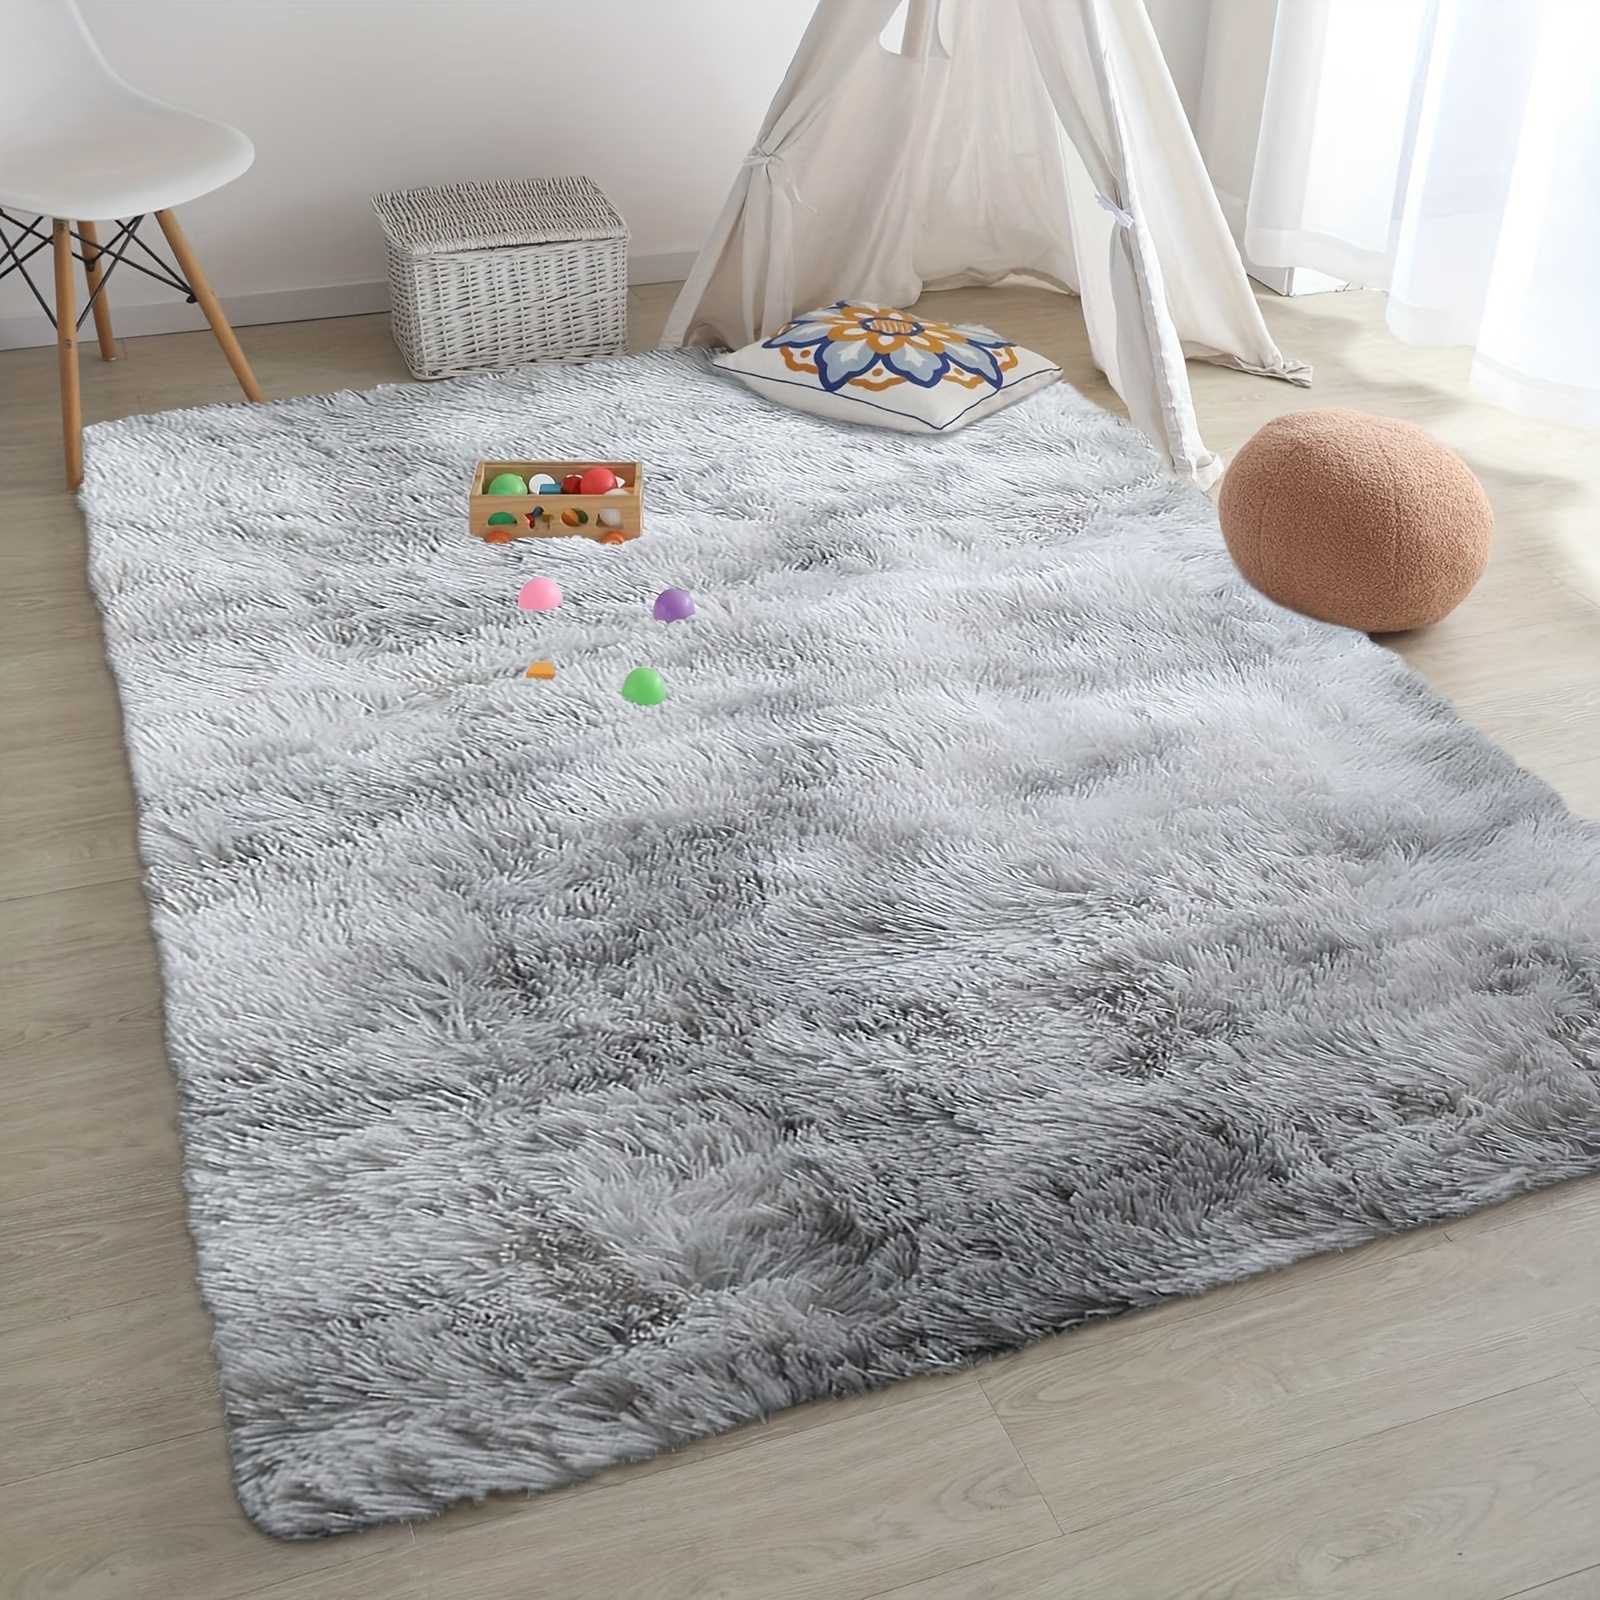 

1pc Luxury Shag Area Rug, Modern Rectangle Plush Fuzzy Rugs, Machine Washable, Non-shedding Bedroom Bedside Rugs, Non-slip Shaggy Furry Carpets For Living Room Bedroom, Home Decor, Room Decor